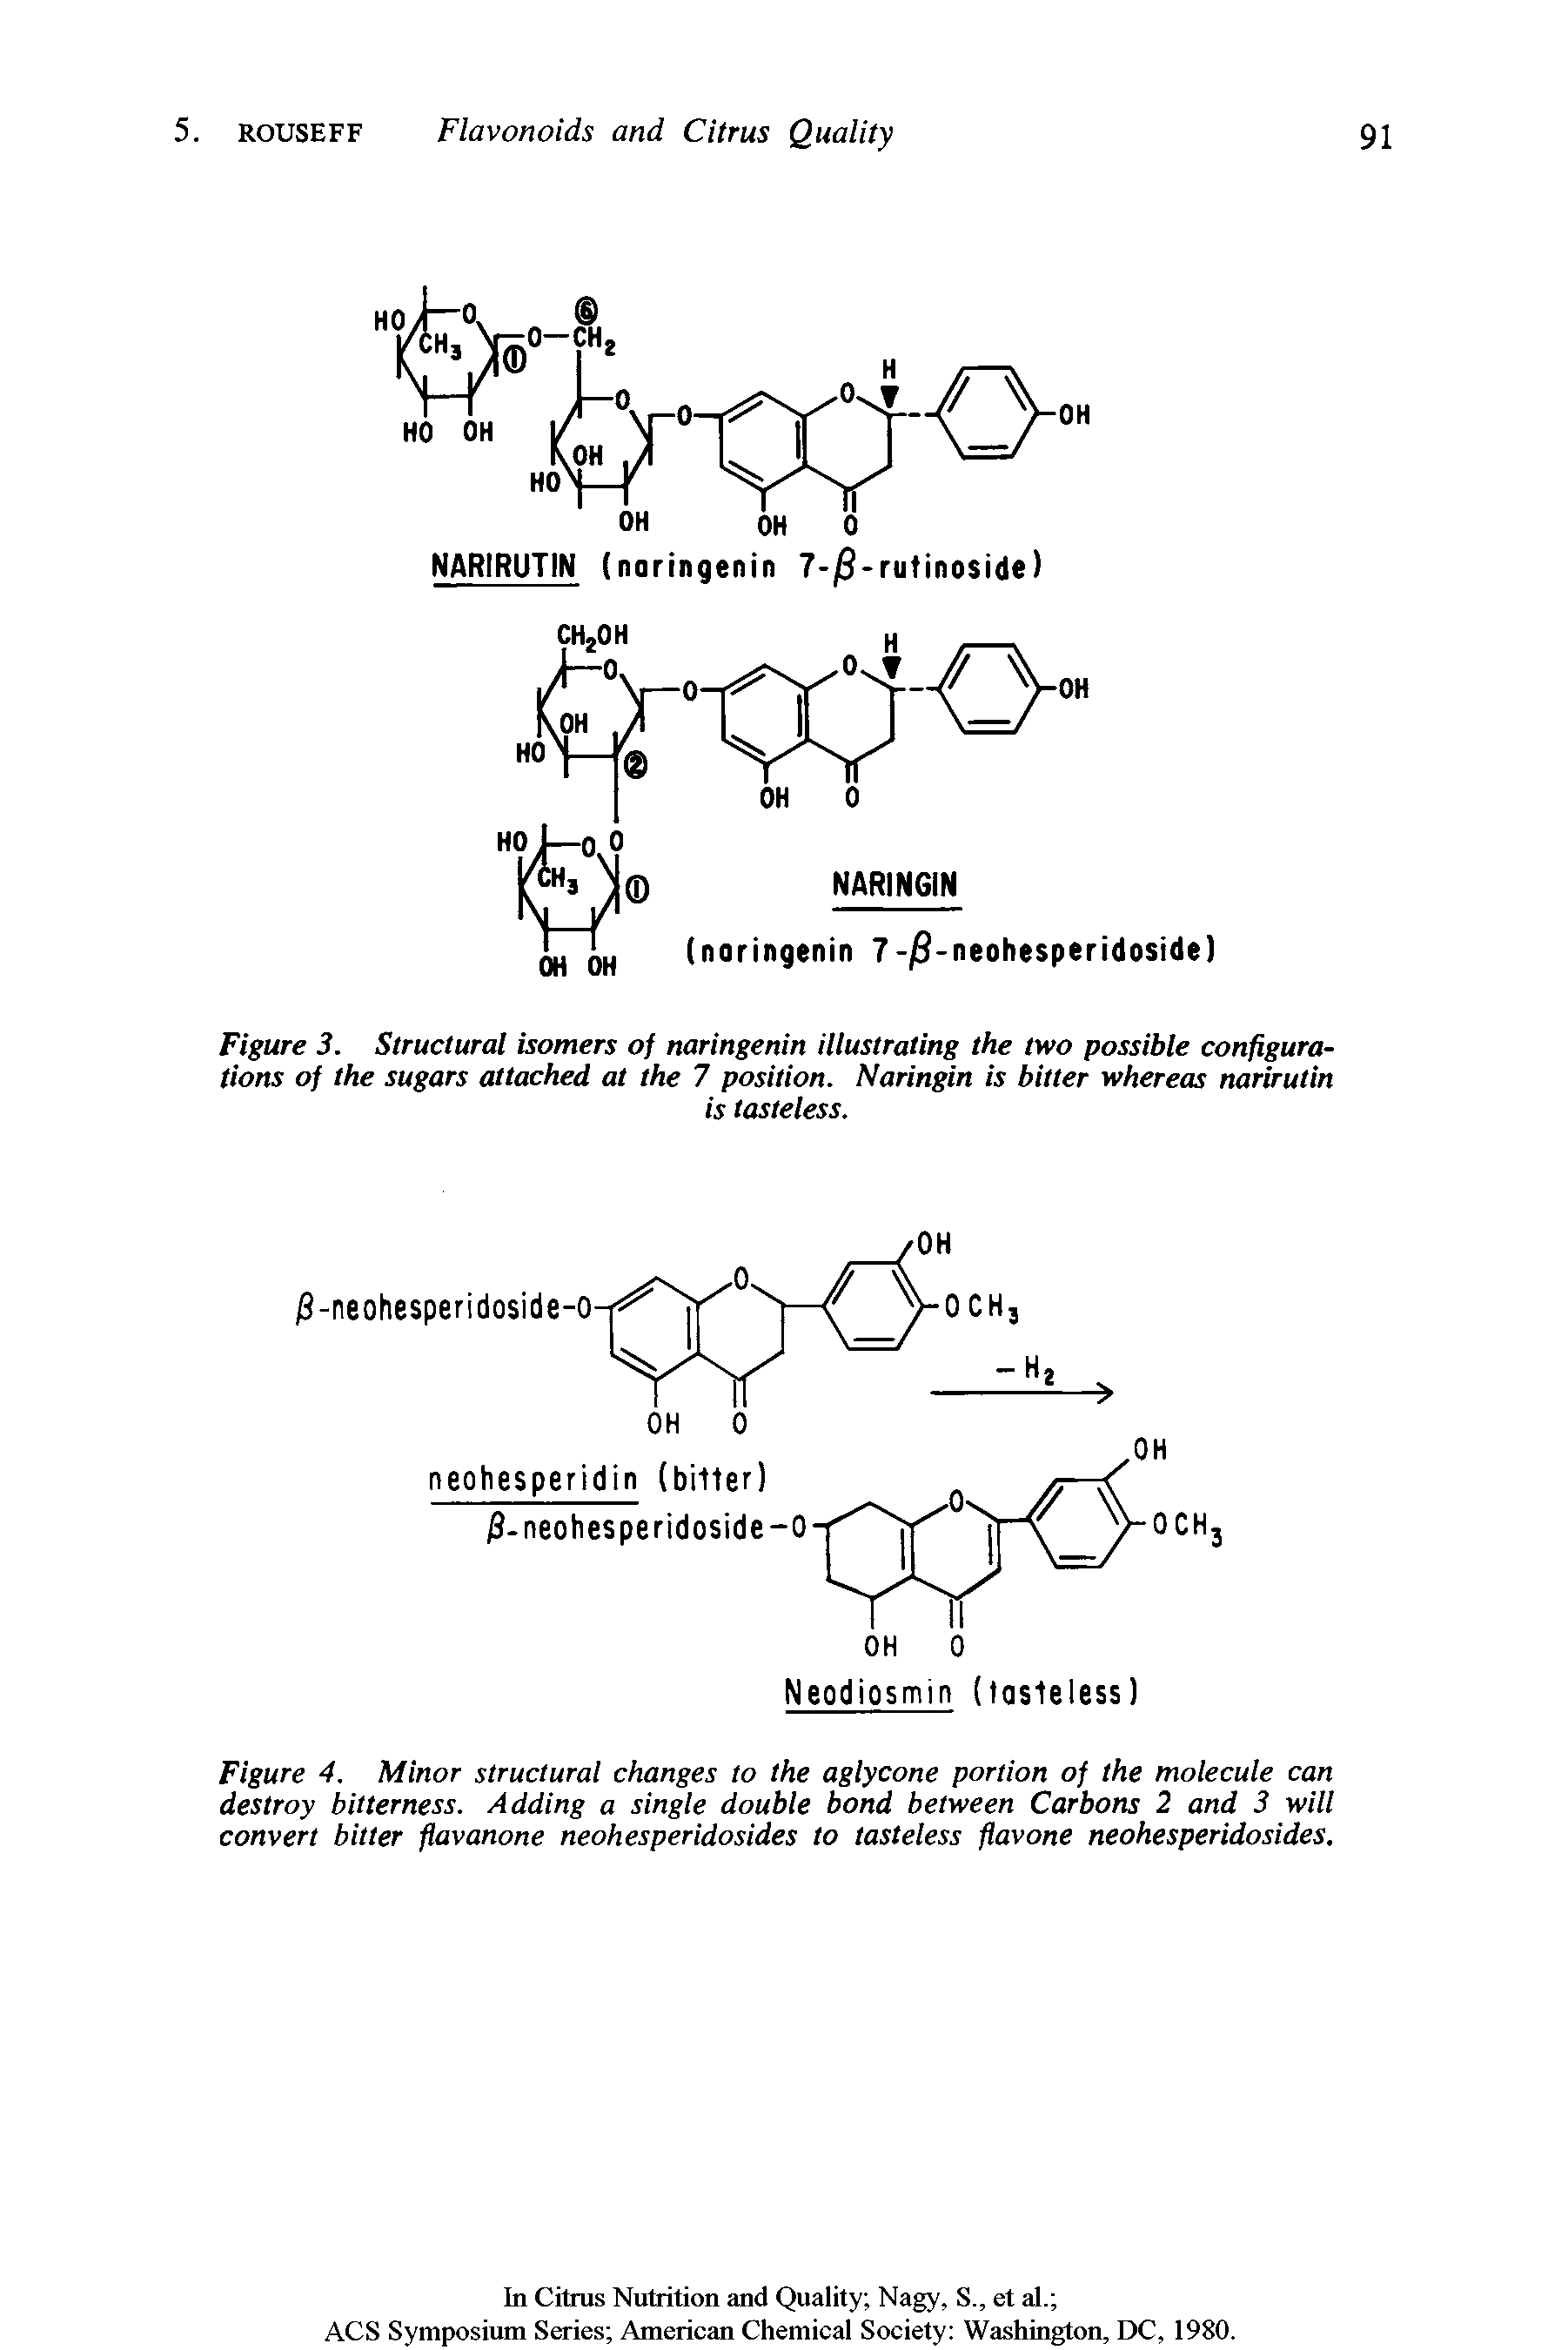 Figure 4. Minor structural changes to the aglycone portion of the molecule can destroy bitterness. Adding a single double bond between Carbons 2 and 3 will convert bitter flavanone neohesperidosides to tasteless flavone neohesperidosides.